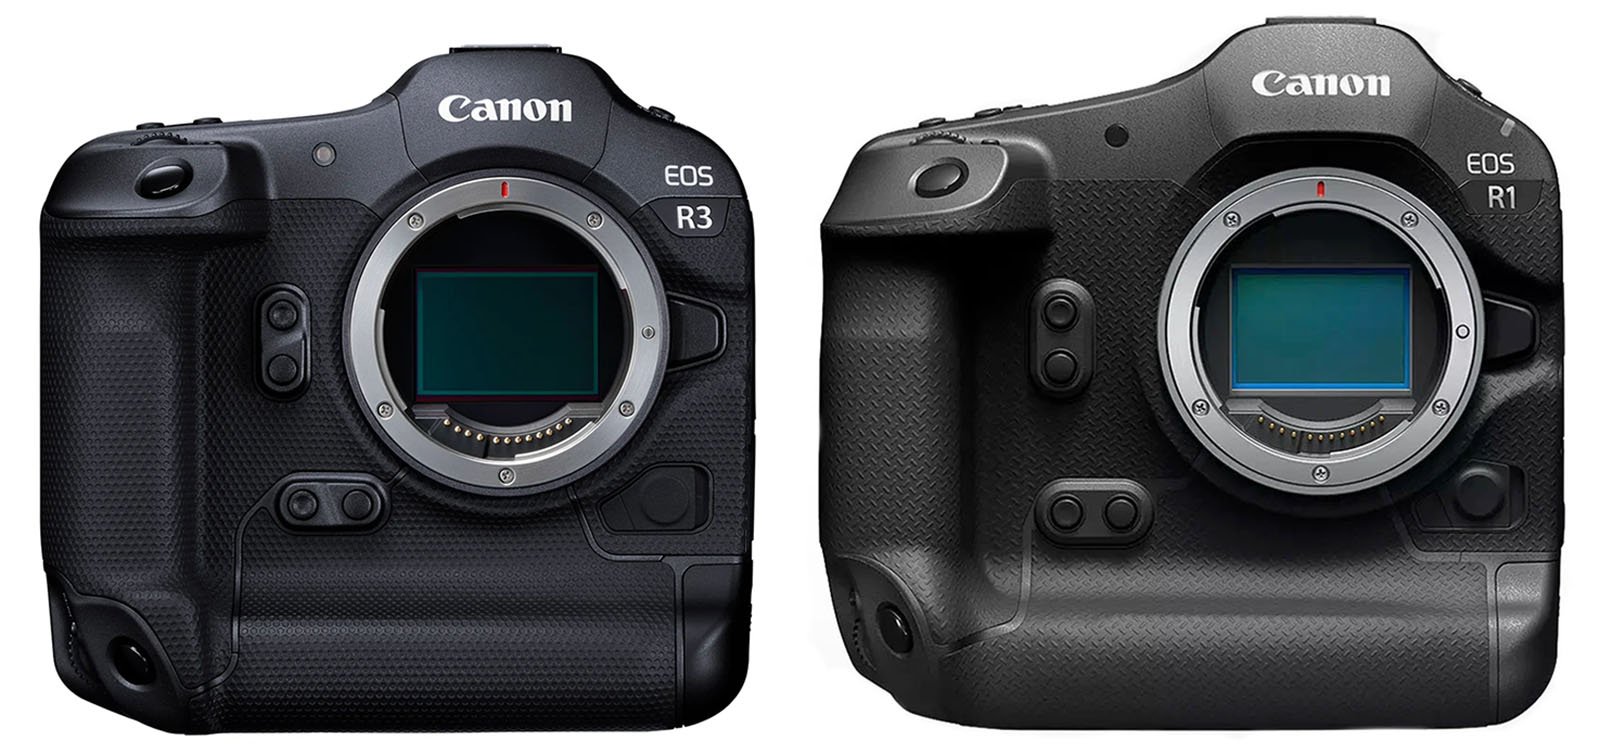 Two Canon DSLR cameras, the EOS R3 on the left and the EOS R1 on the right, both without lenses attached. The cameras are black and feature several buttons and dials for controls. The name "Canon" is printed at the top of both cameras.